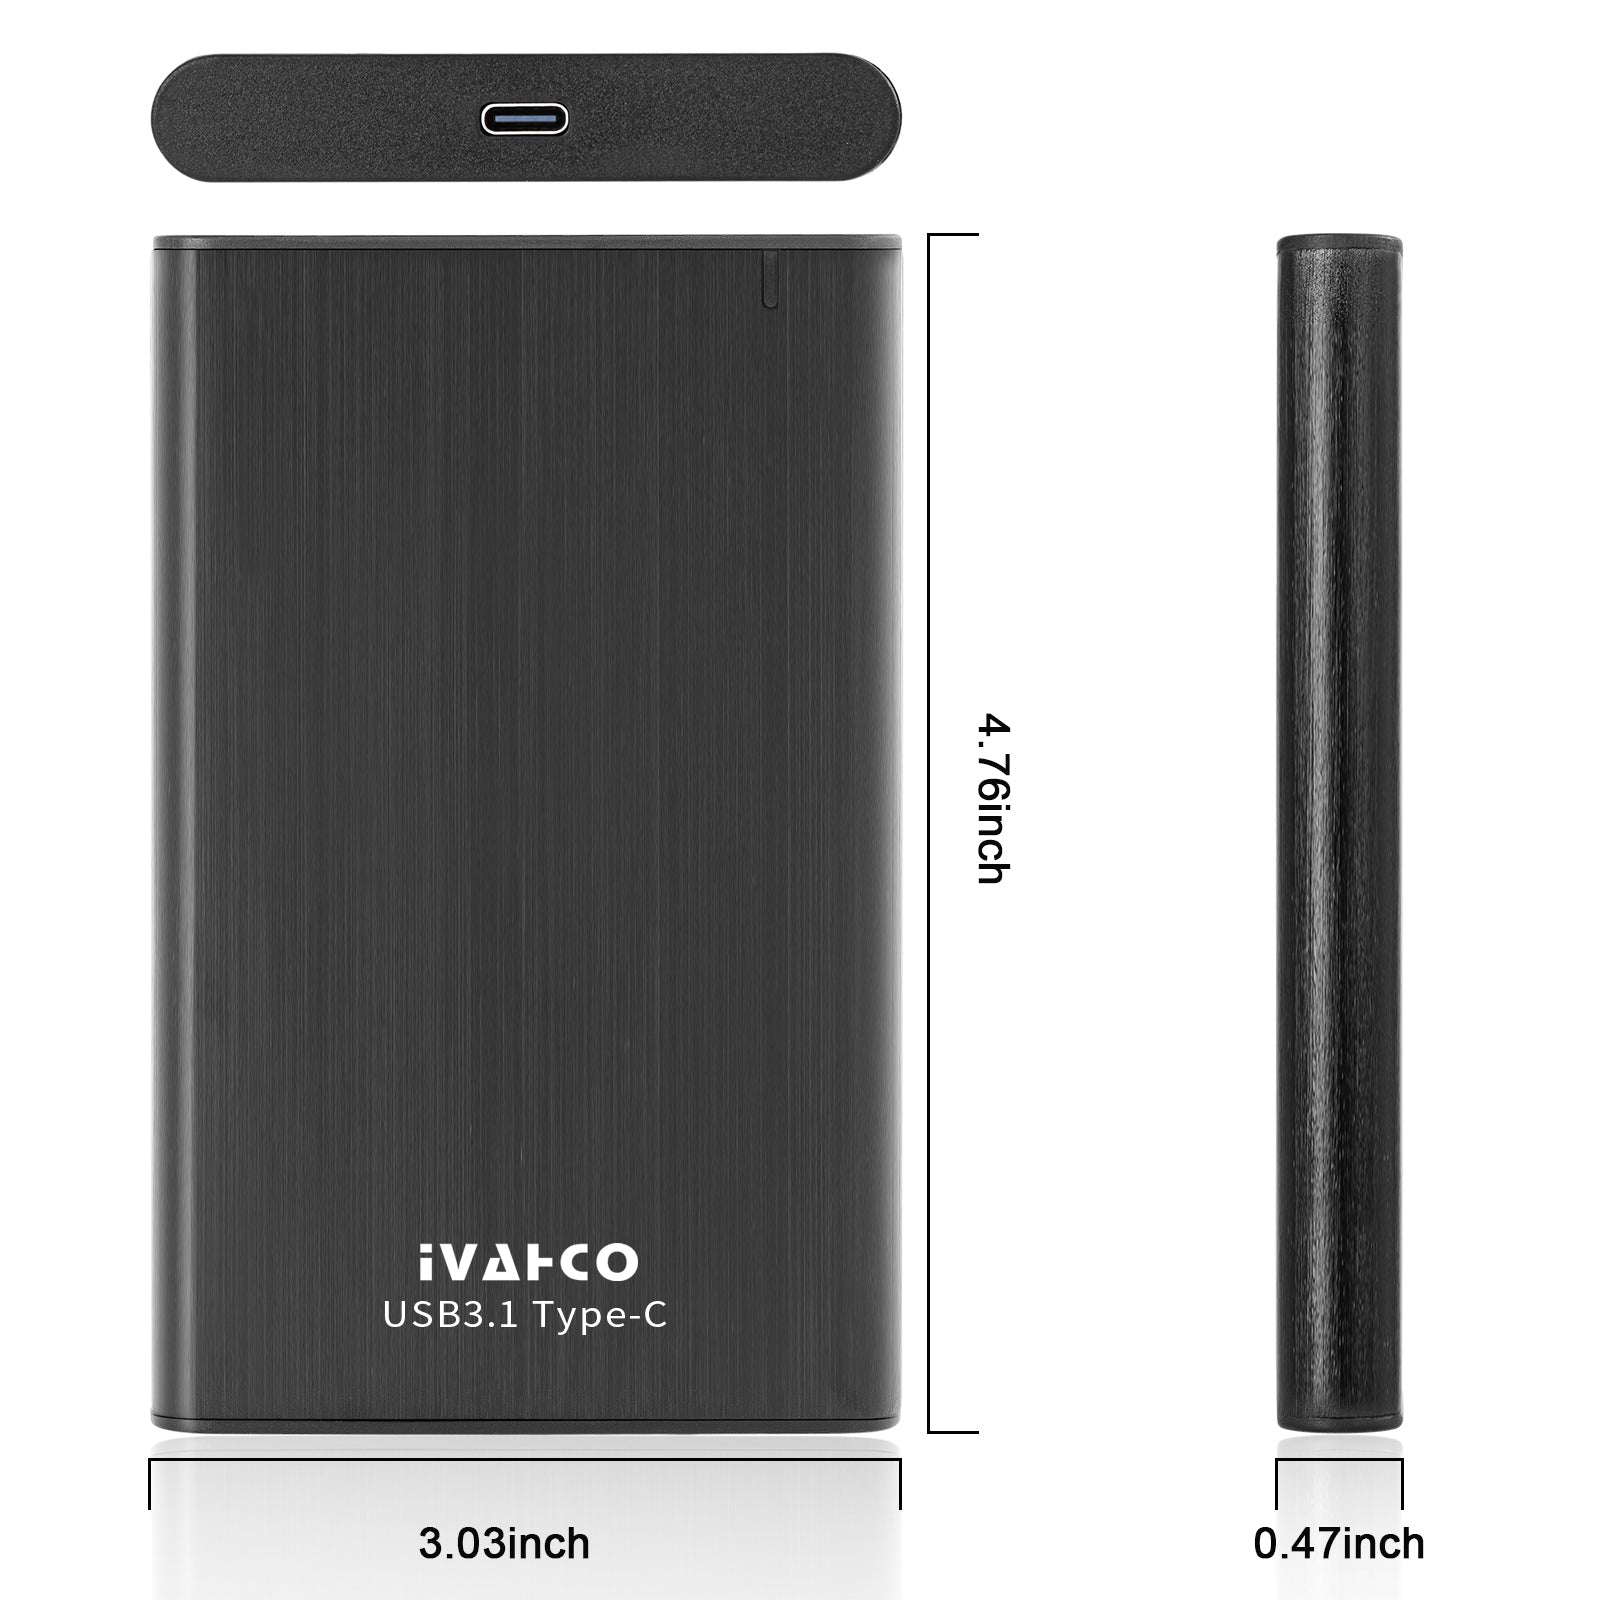 IVAHCO 1TB Type-C USB3.1 2.5" HDD External Case Plug and Play Brushed Metal Solid State Drive Enclosure - Blue